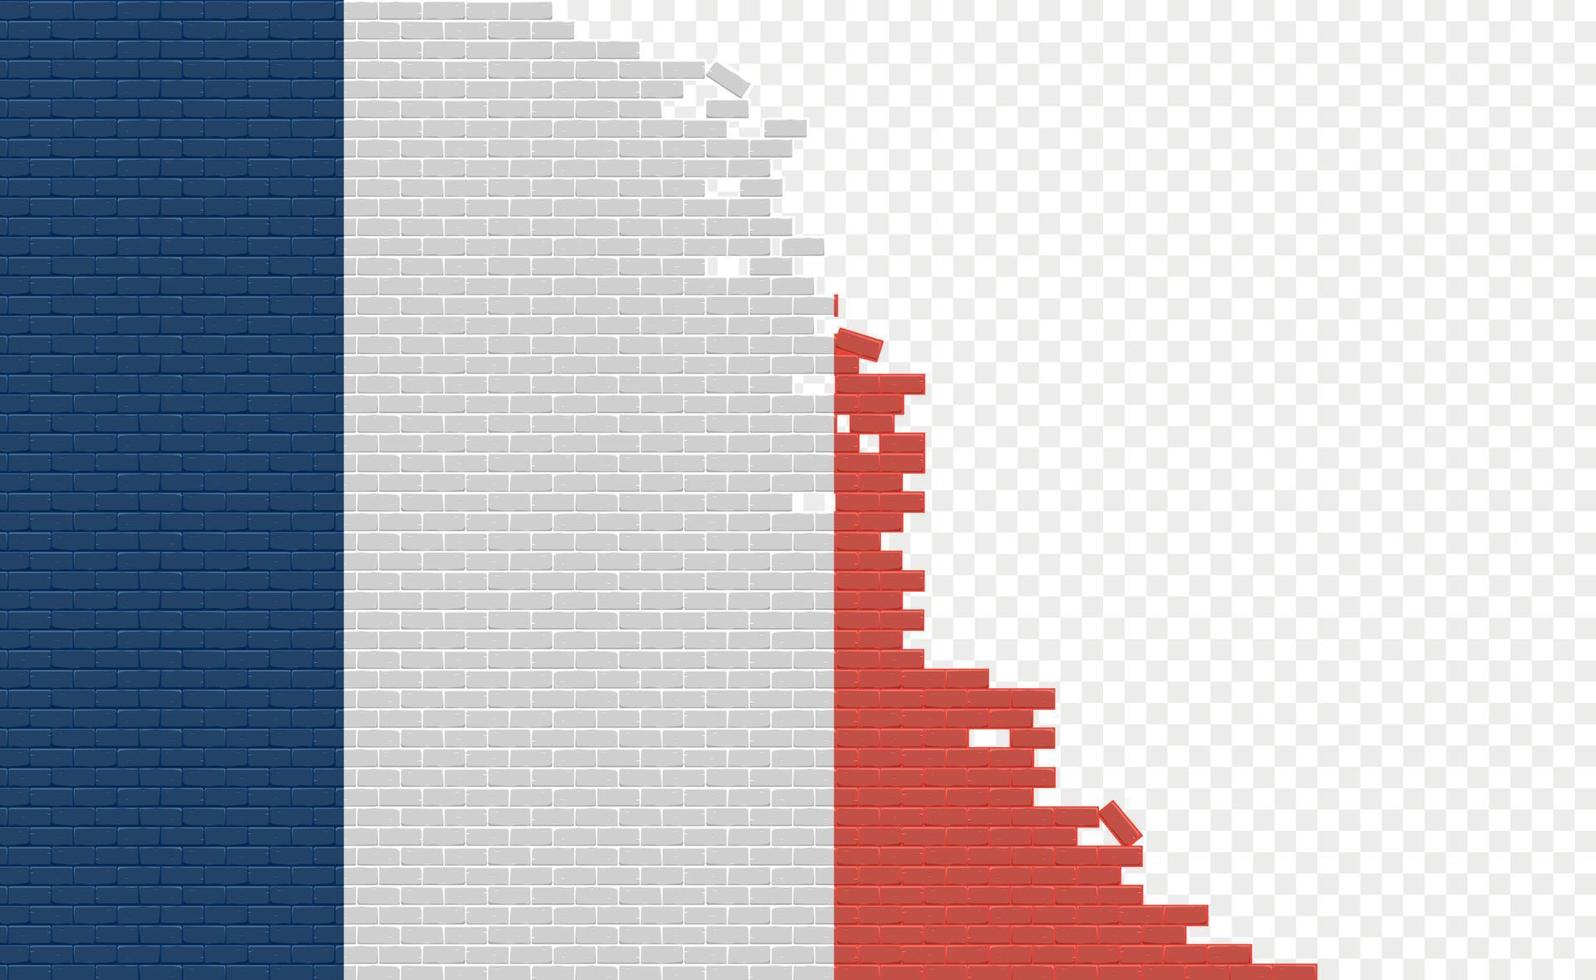 France flag on broken brick wall. Empty flag field of another country. Country comparison. Easy editing and vector in groups.